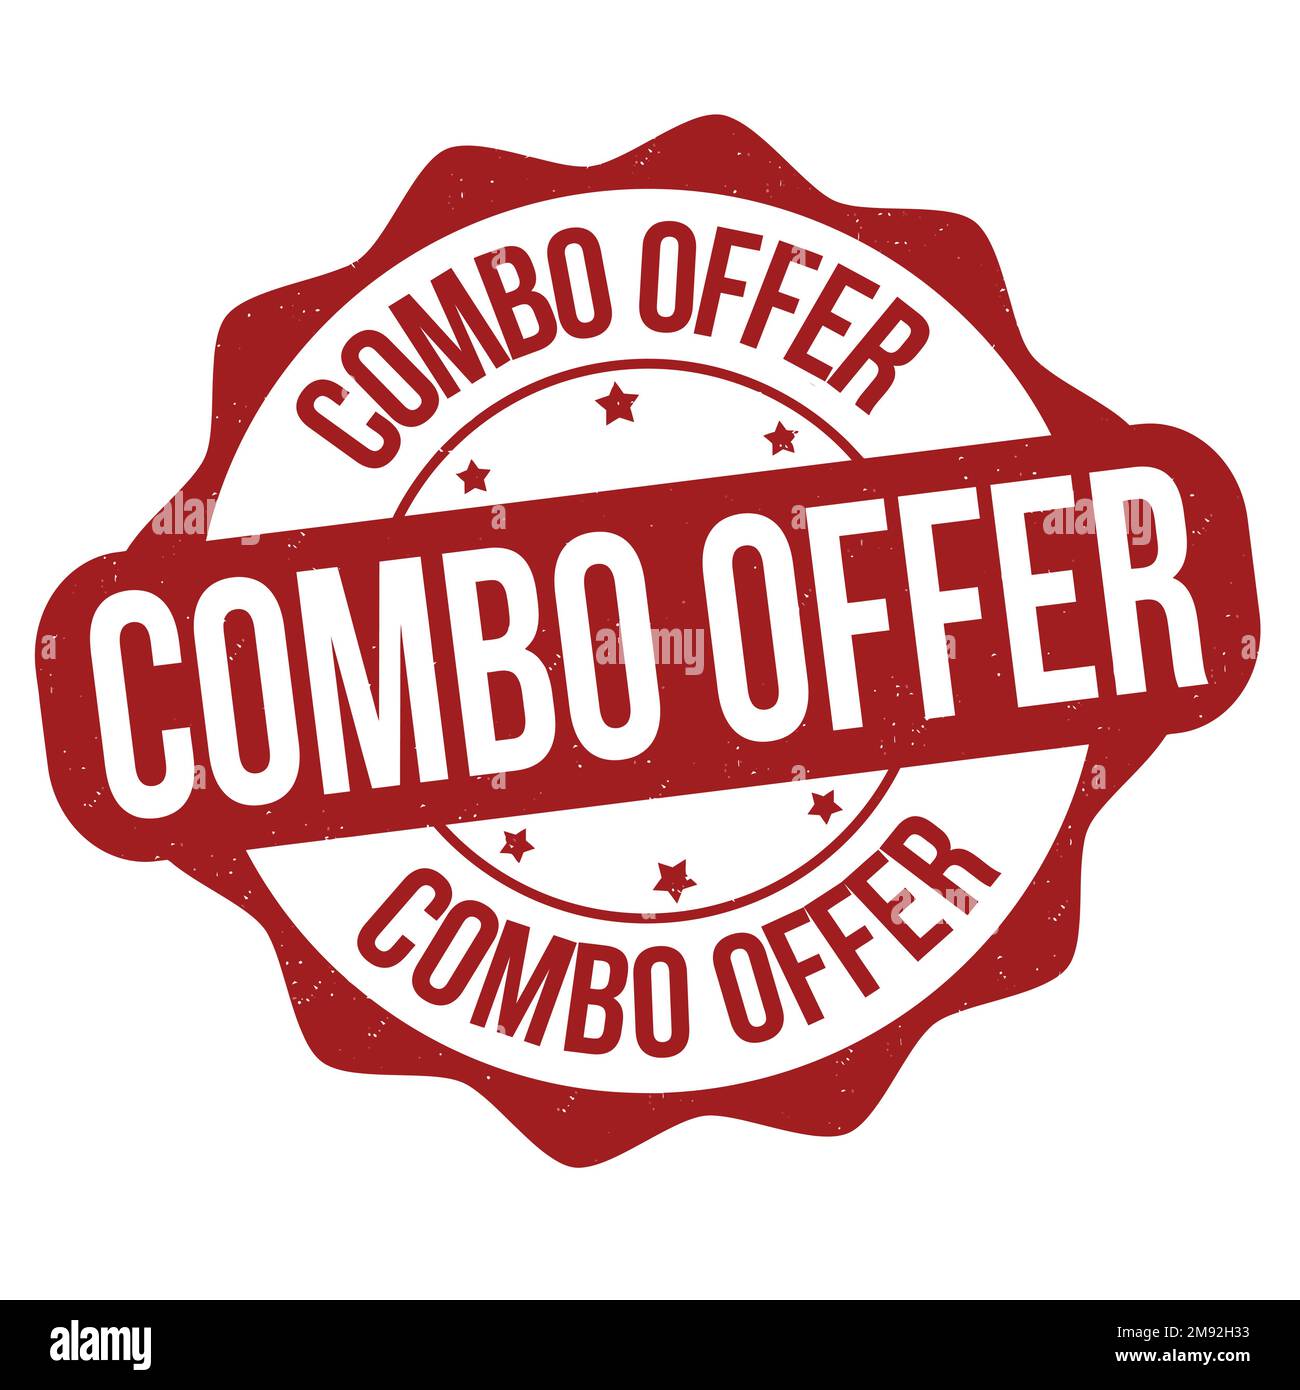 Combo offer label or stamp on white background, vector